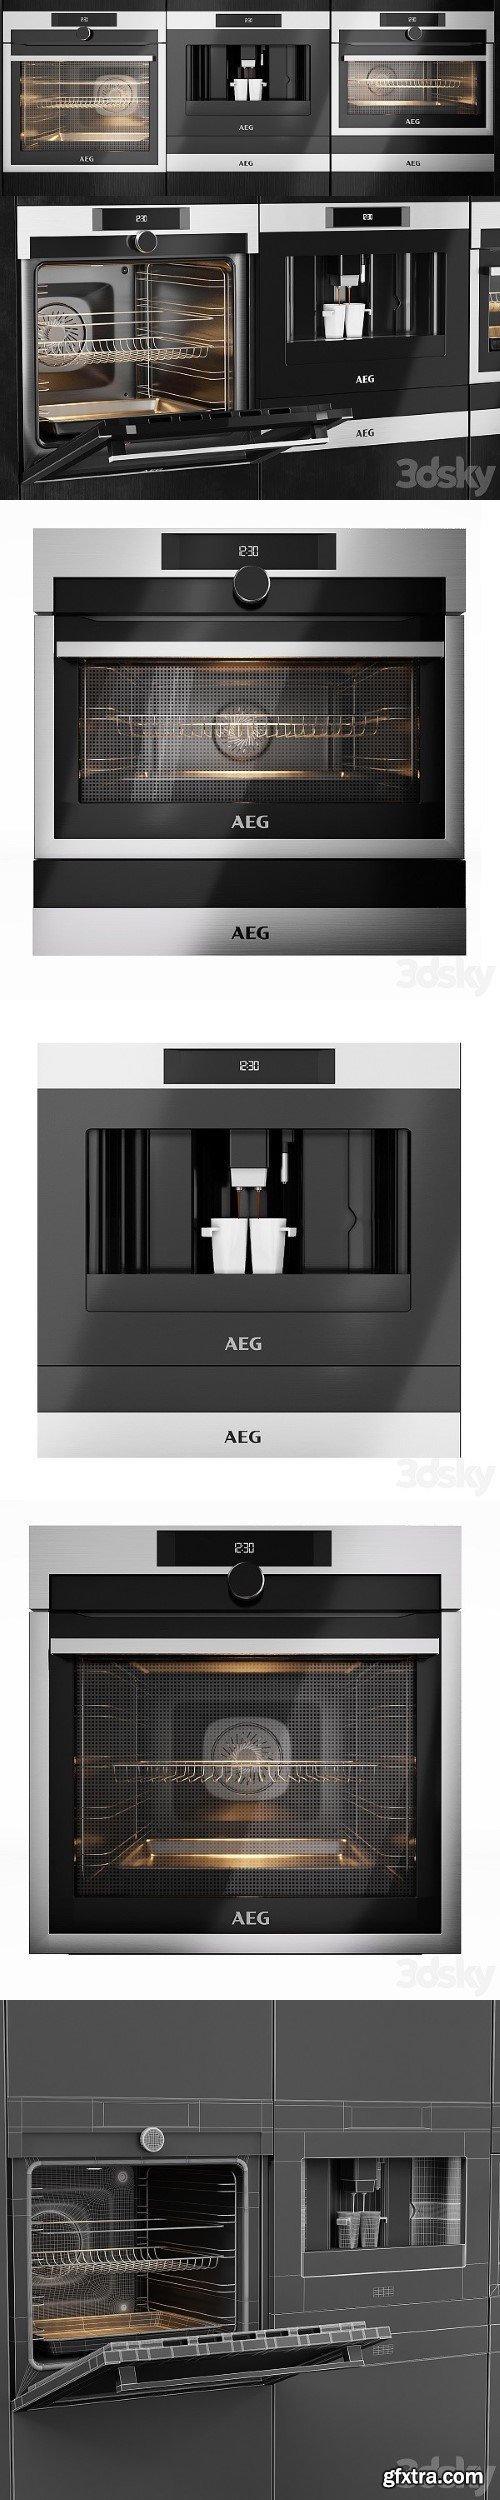 AEG Appliance Collection